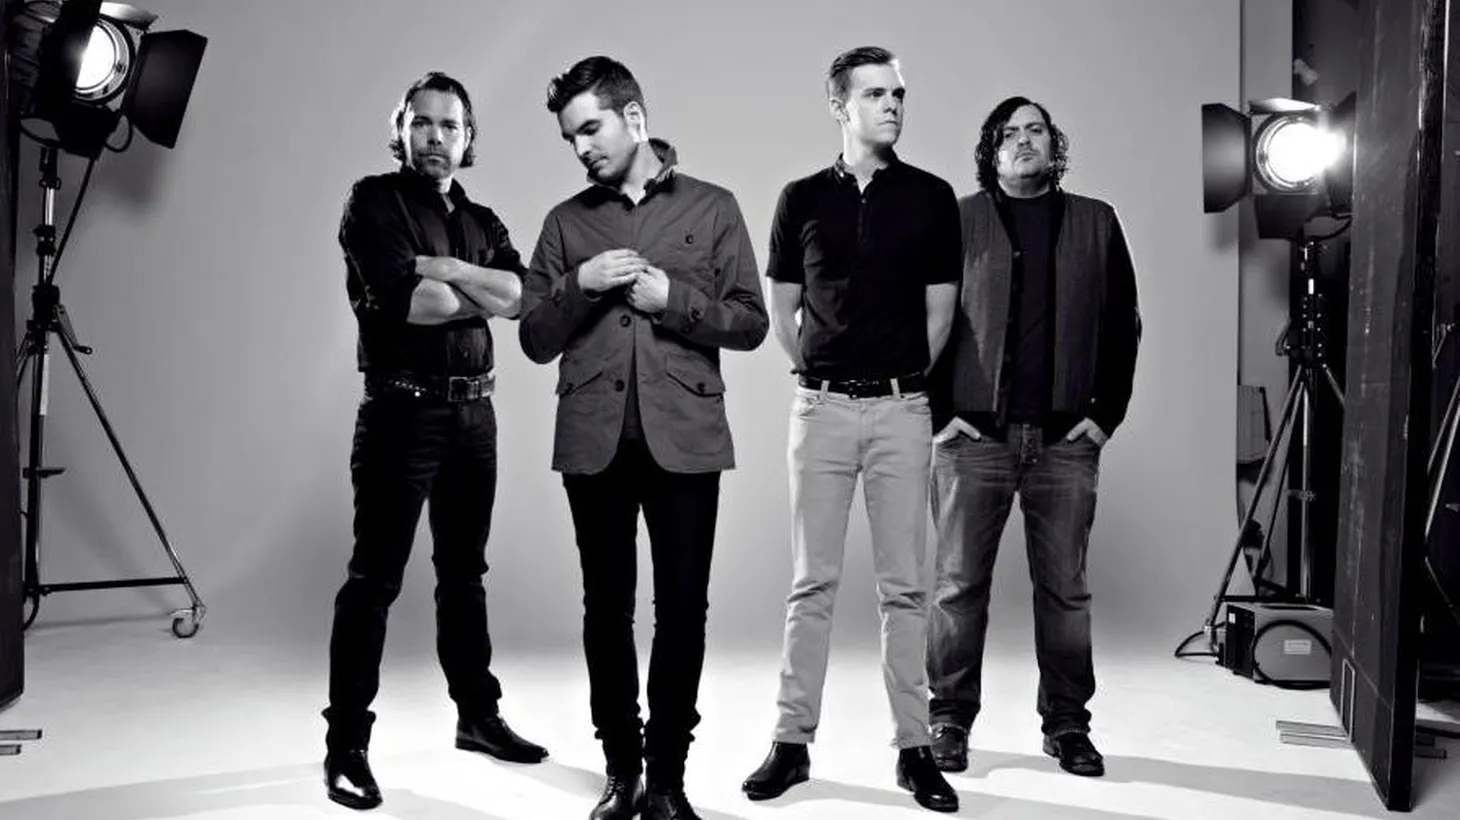 Jason Bentley says The Boxer Rebellion's music and lyrics have a gravitational pull that is undeniable as each song builds with rolling intensity.